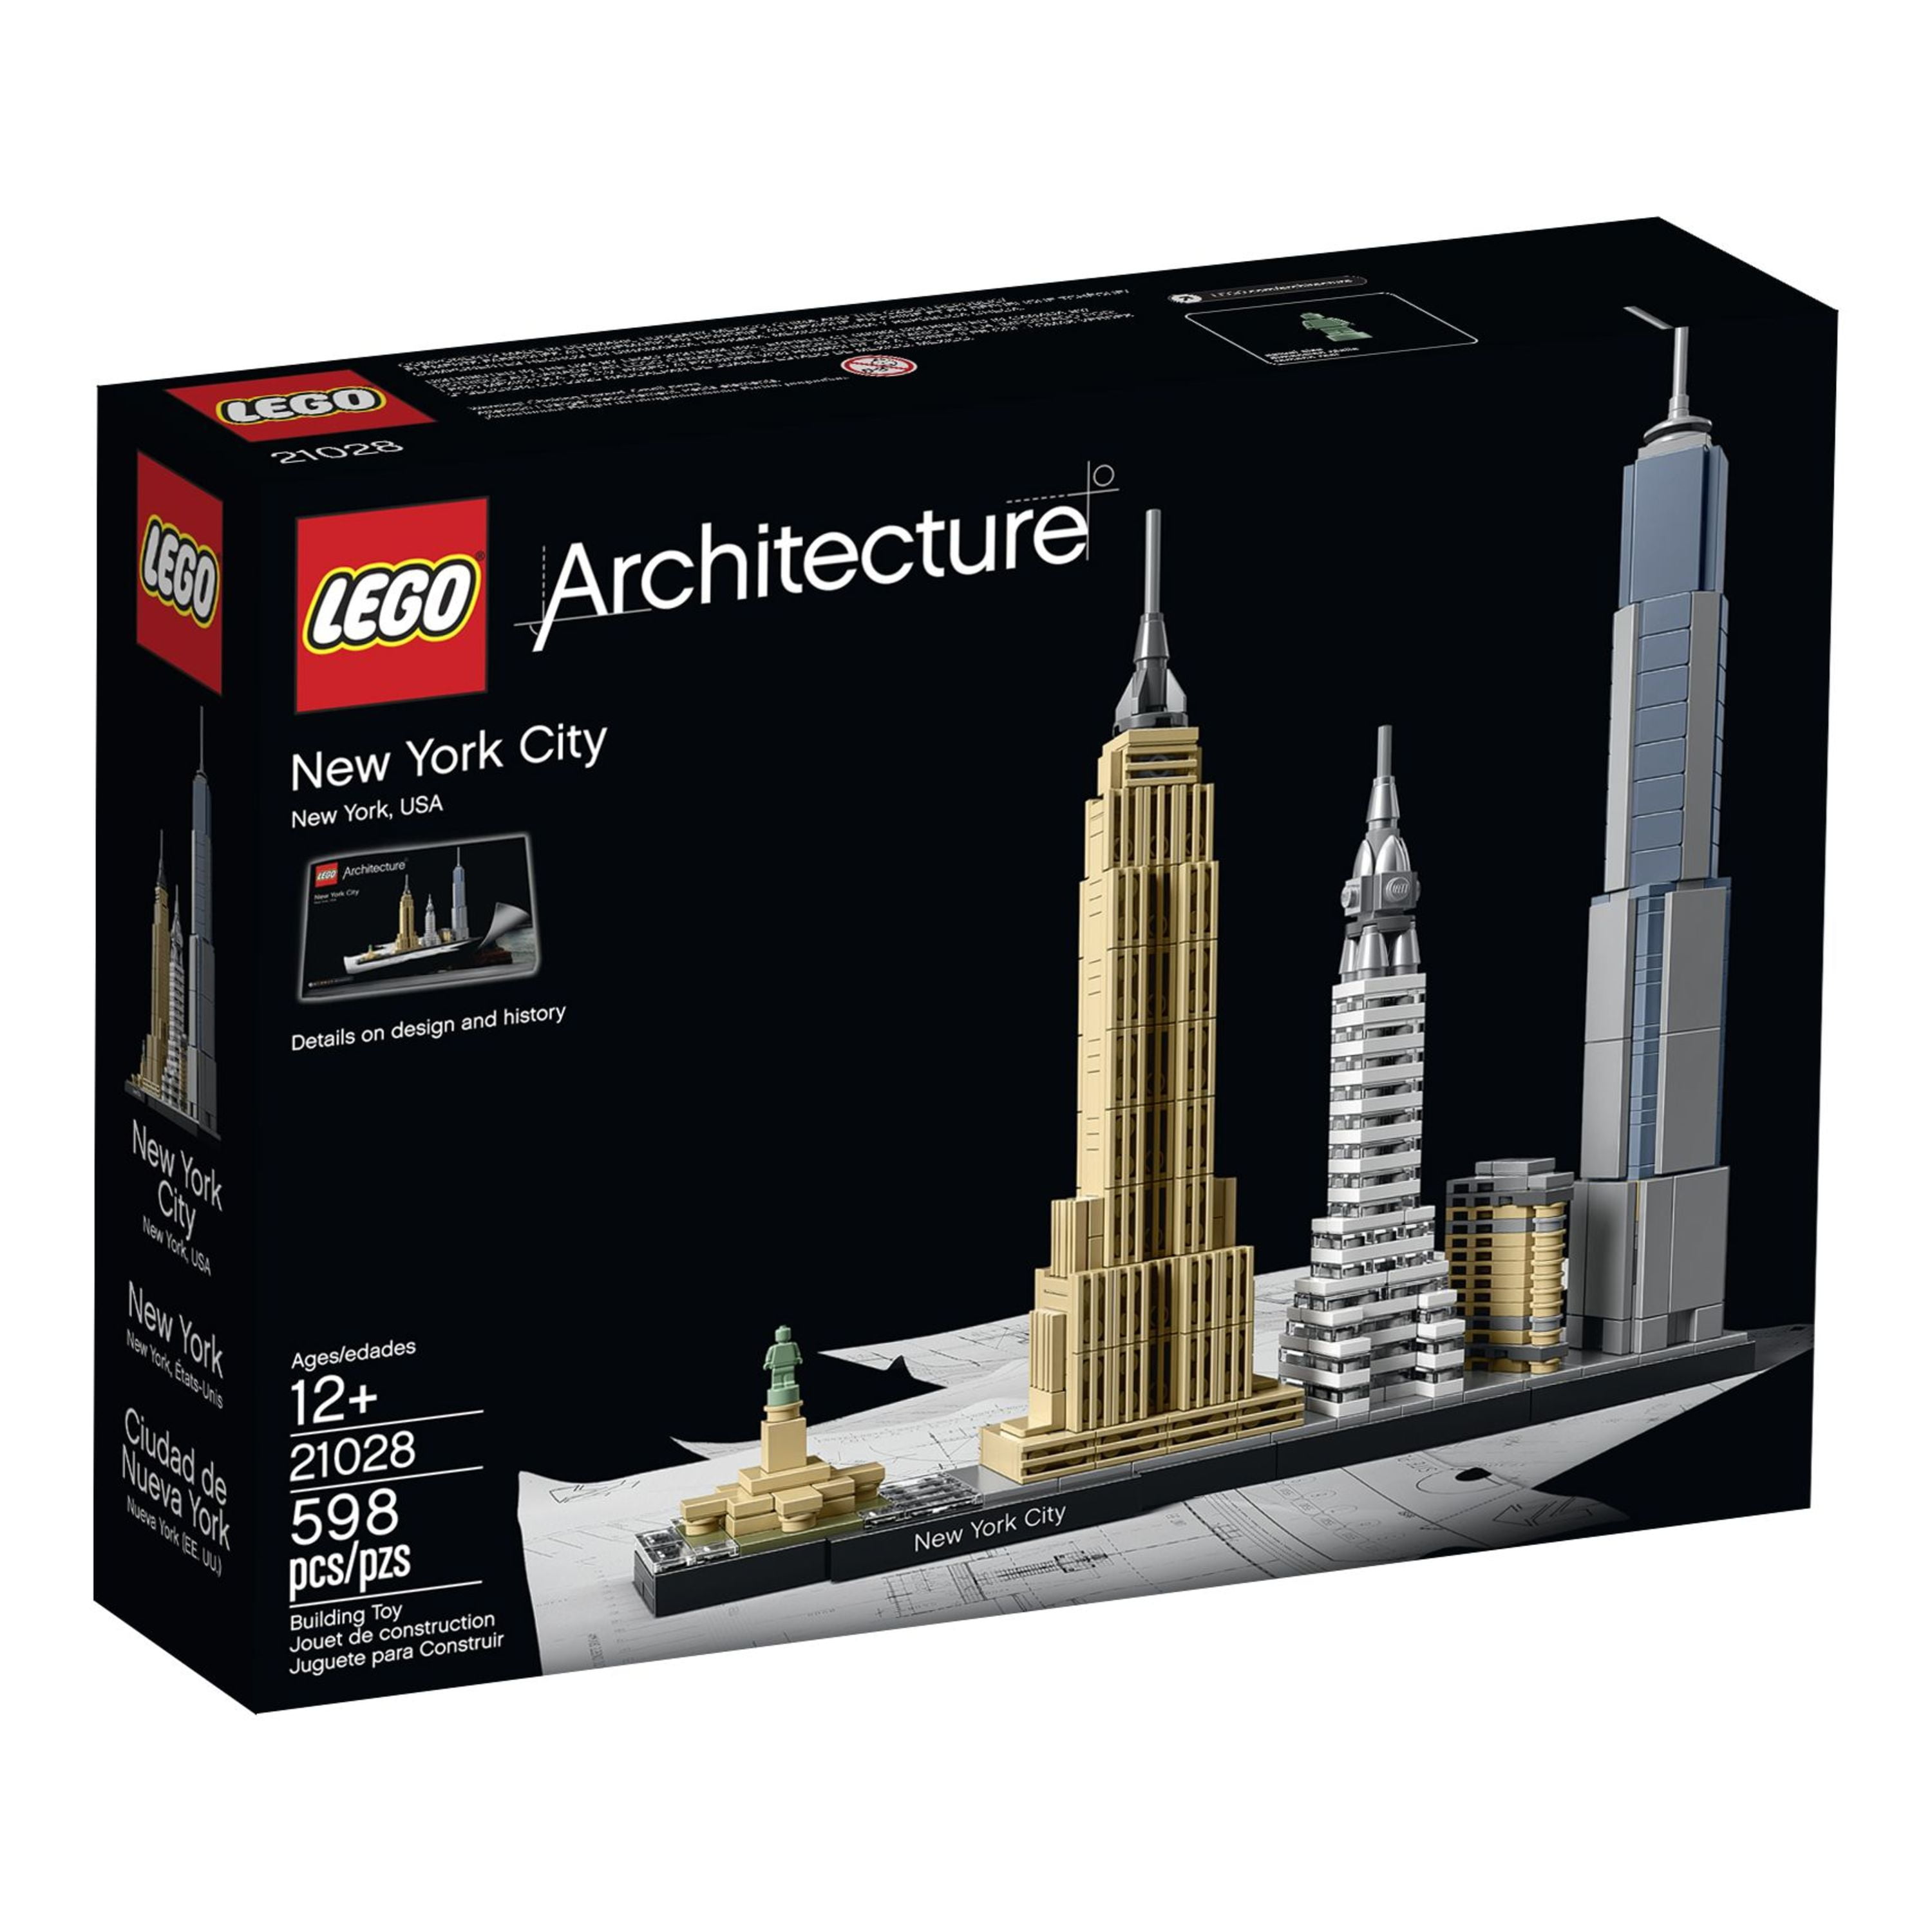 Architecture New City Skyline 21028, Collectible Model Kit for to Build, Creative Home Décor Gift Idea - Walmart.com